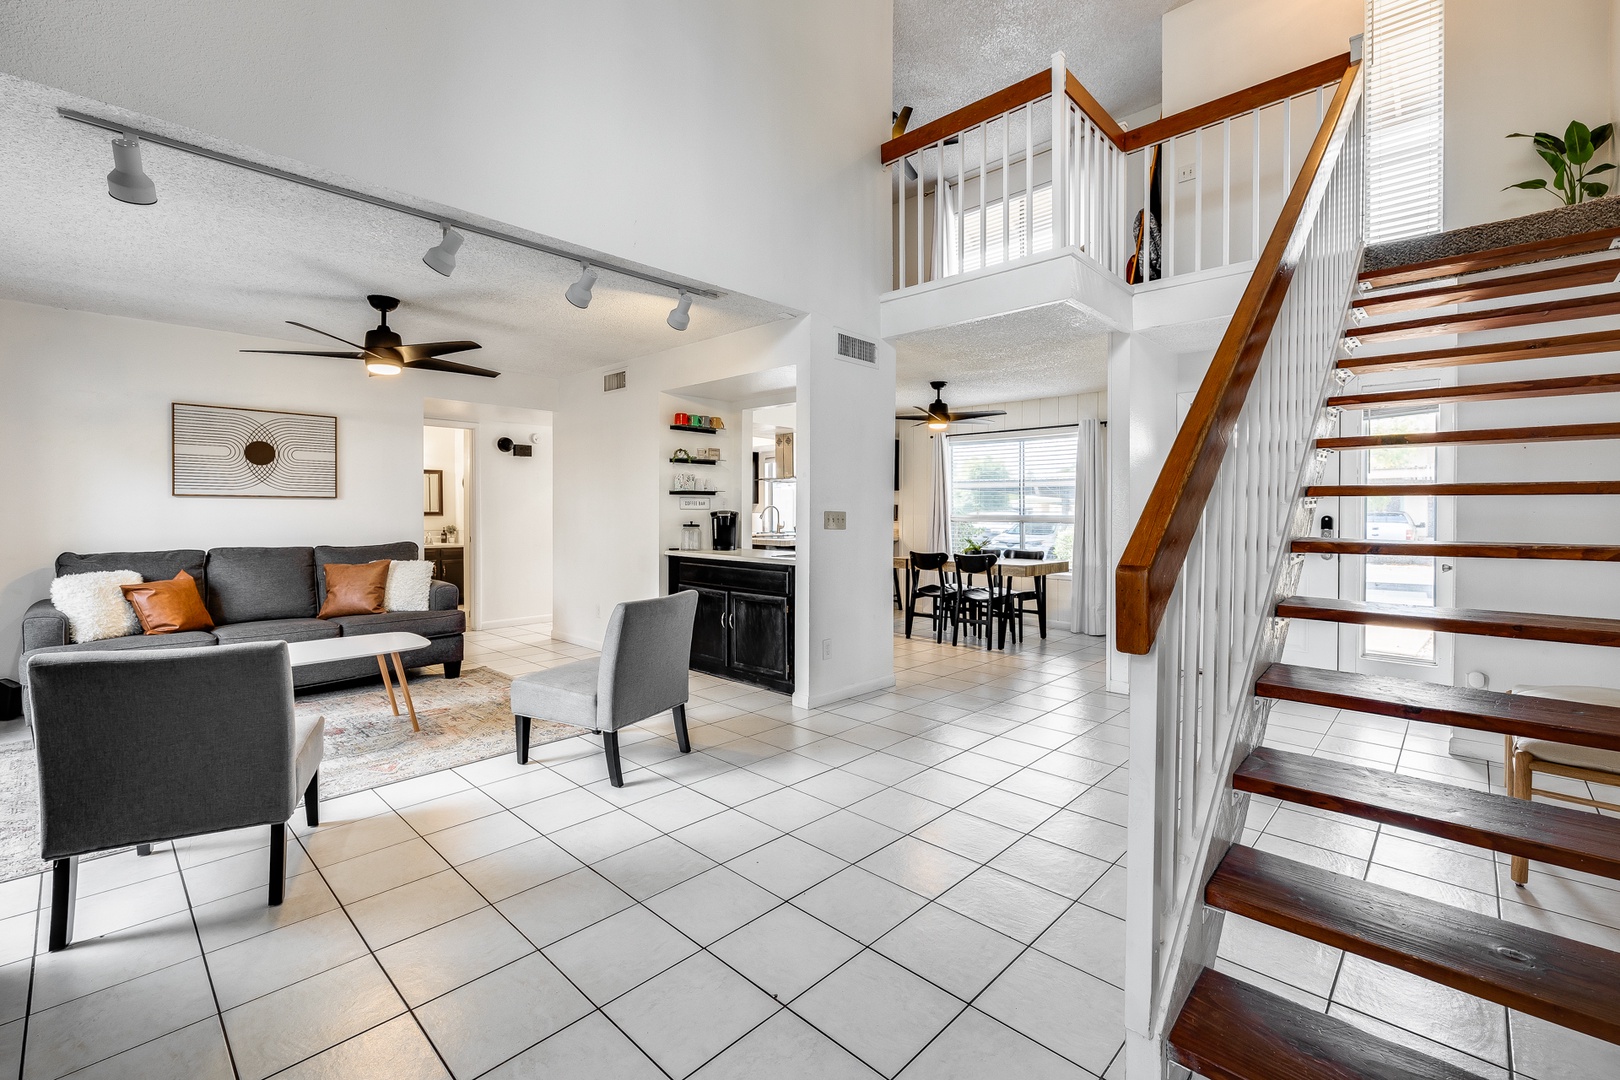 Glendale Vacation Rentals, Condo at the Bell Air - Spend time with your group in the downstairs common spaces or head upstairs to the additional entertainment space and guest bedrooms